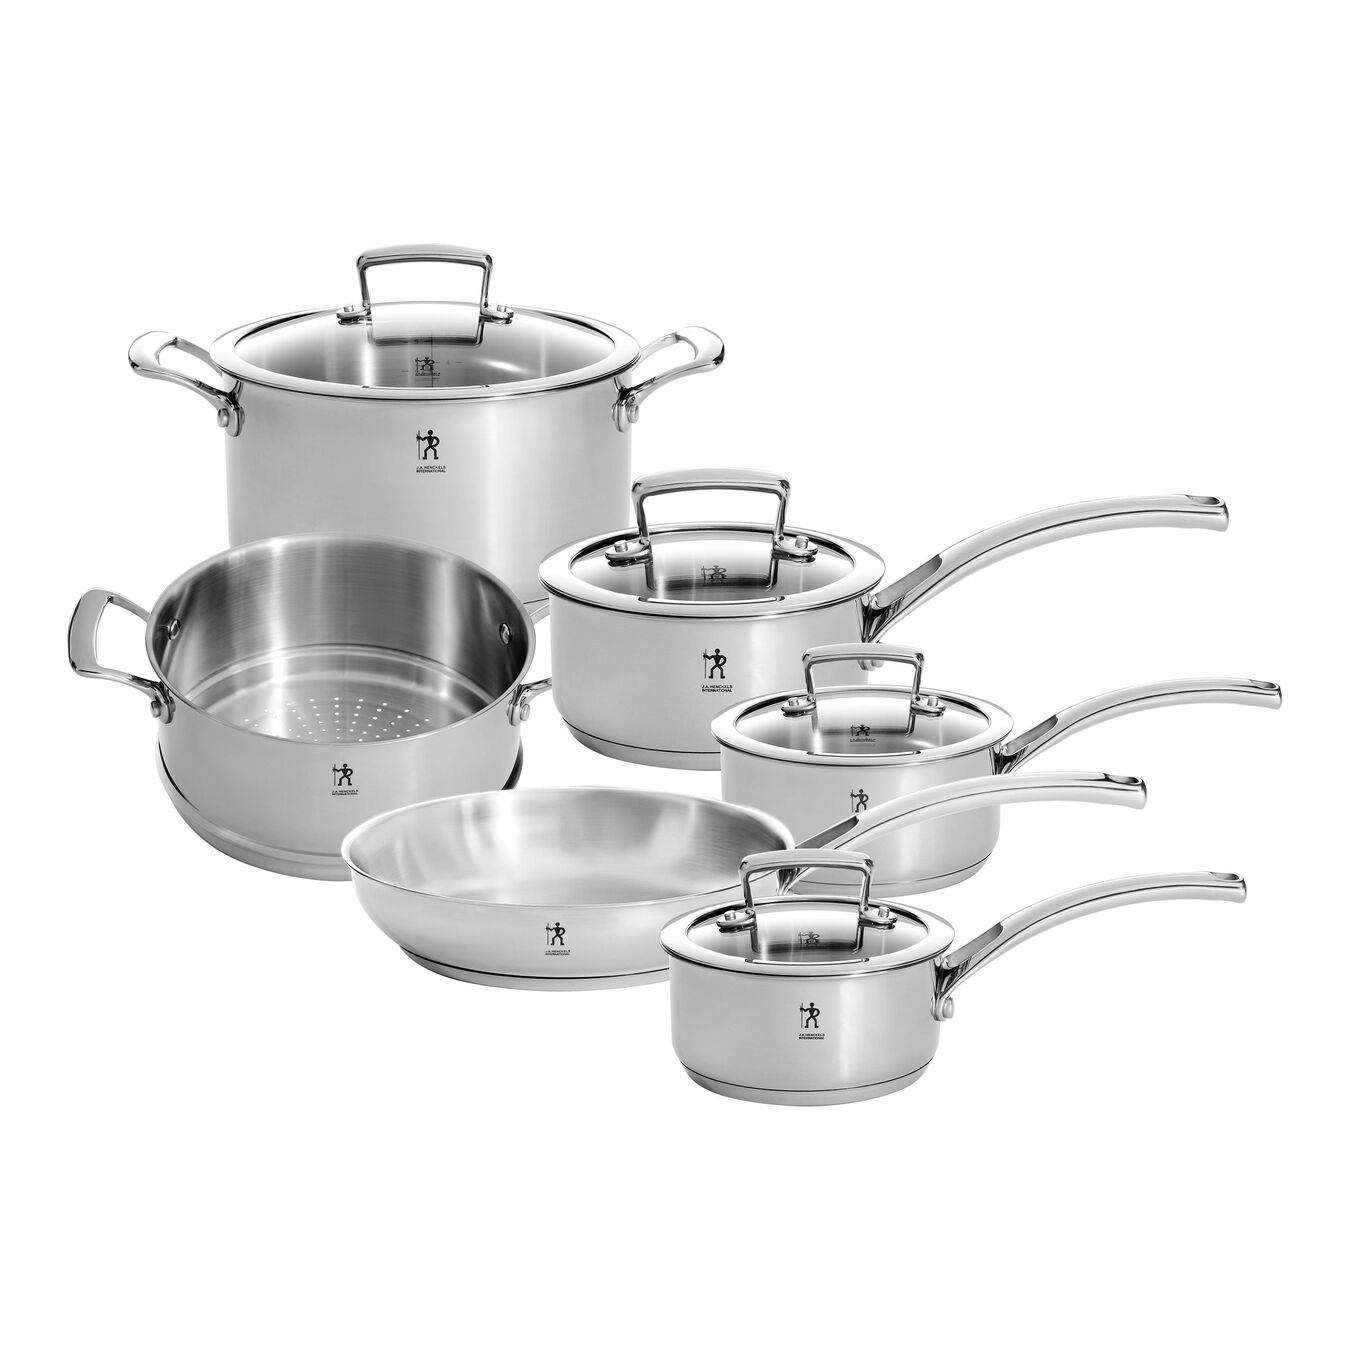 10 Piece 18/10 Stainless Steel Cookware set with glass lid,,large 1